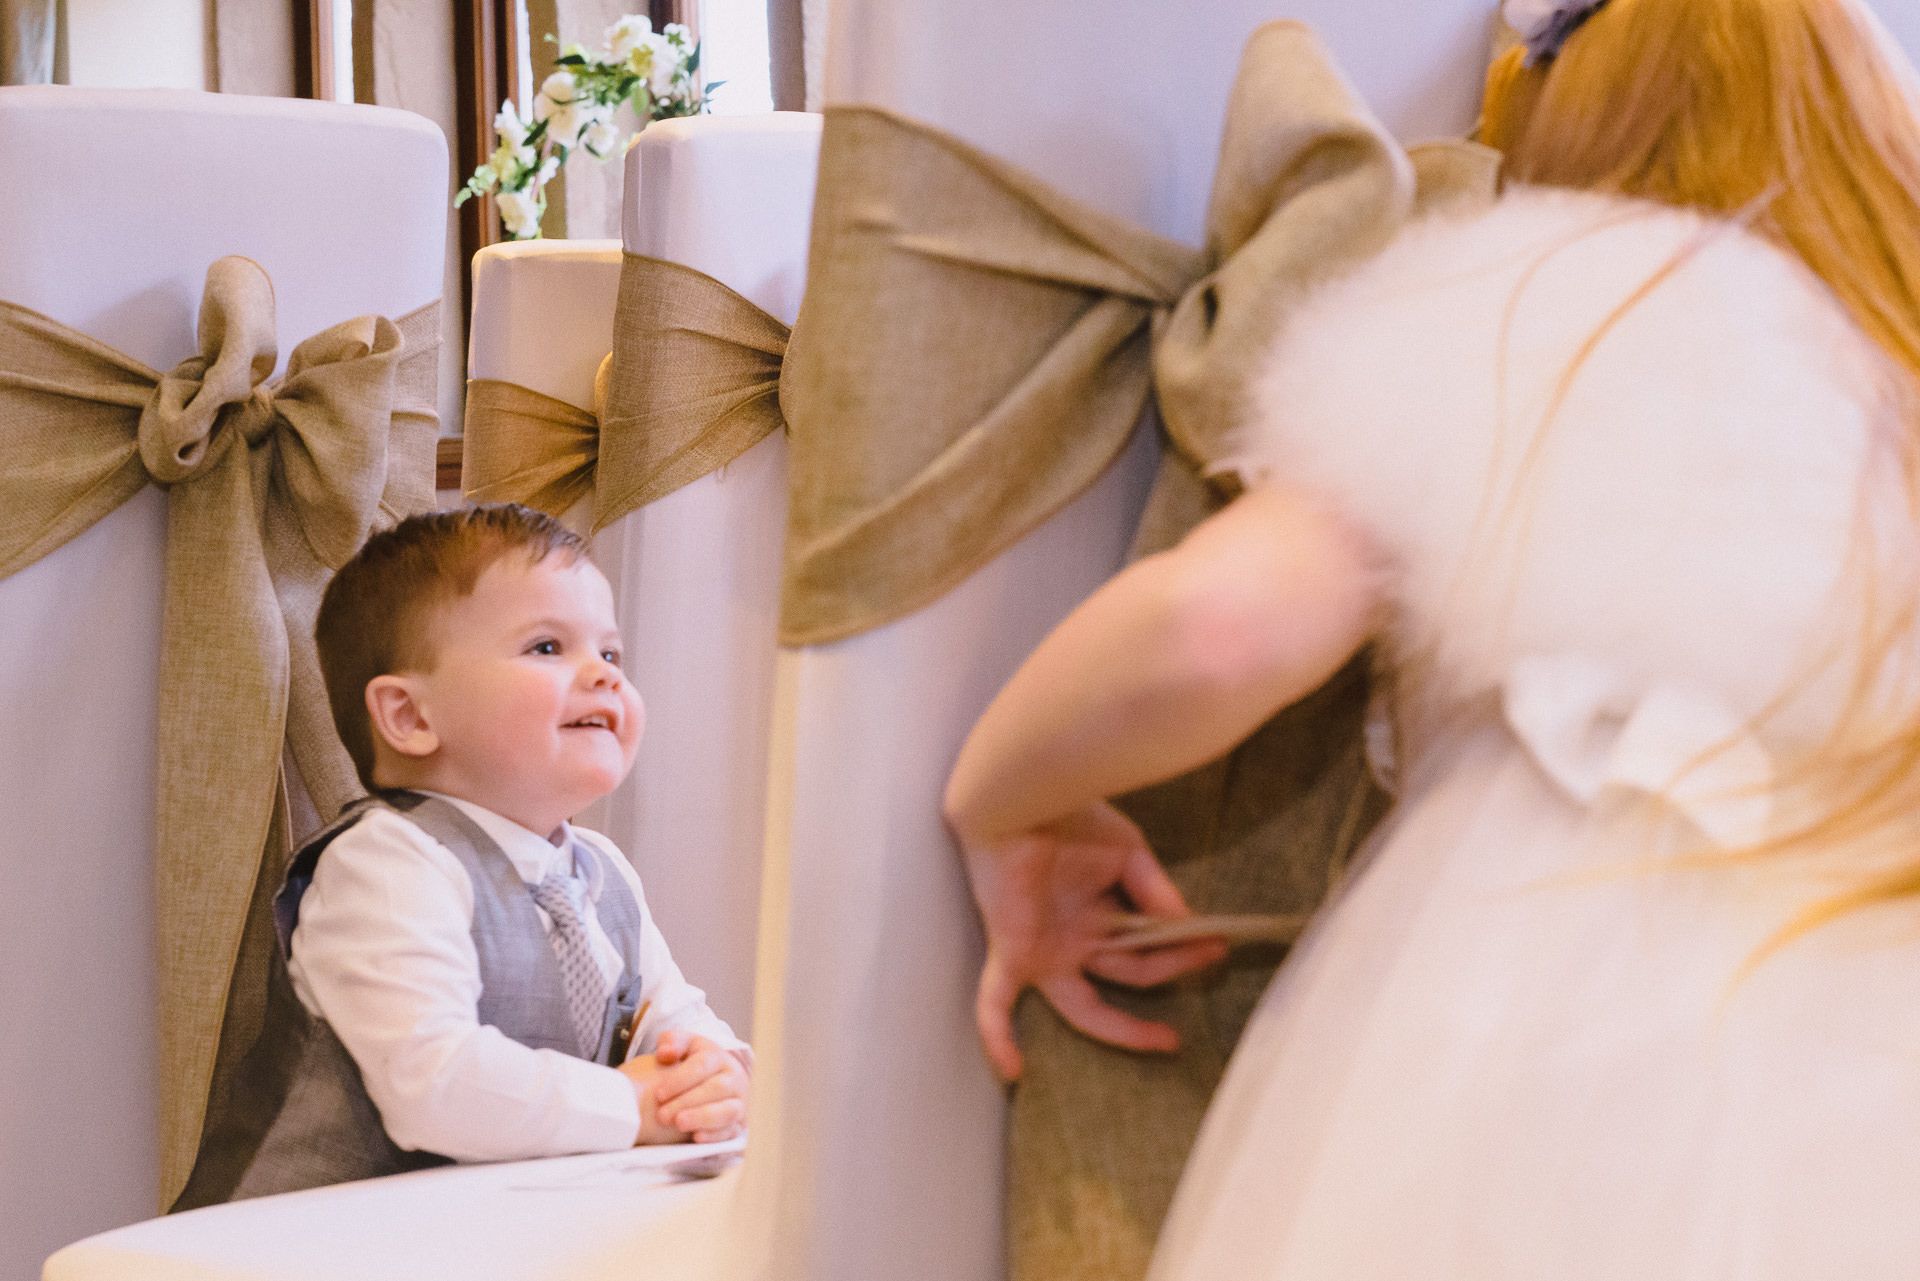 pageboy plays with his sister in the ceremony room